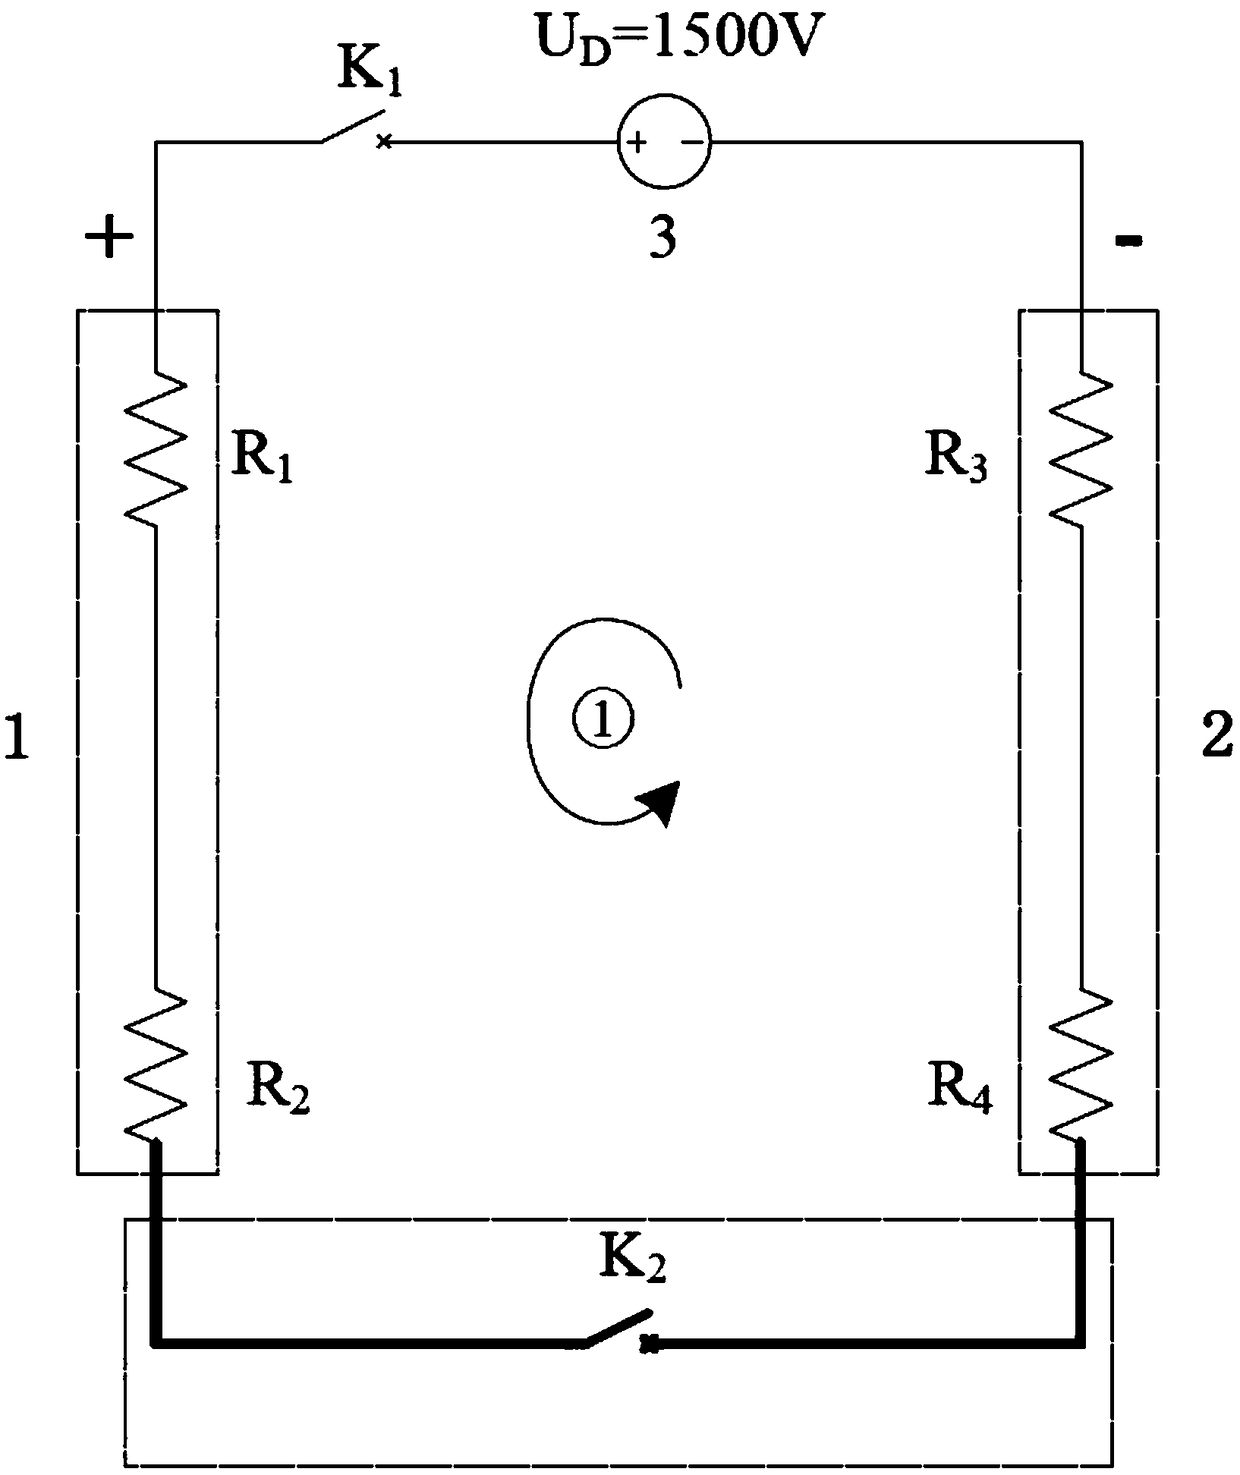 A heating circuit for a railway vehicle power supply contact rail